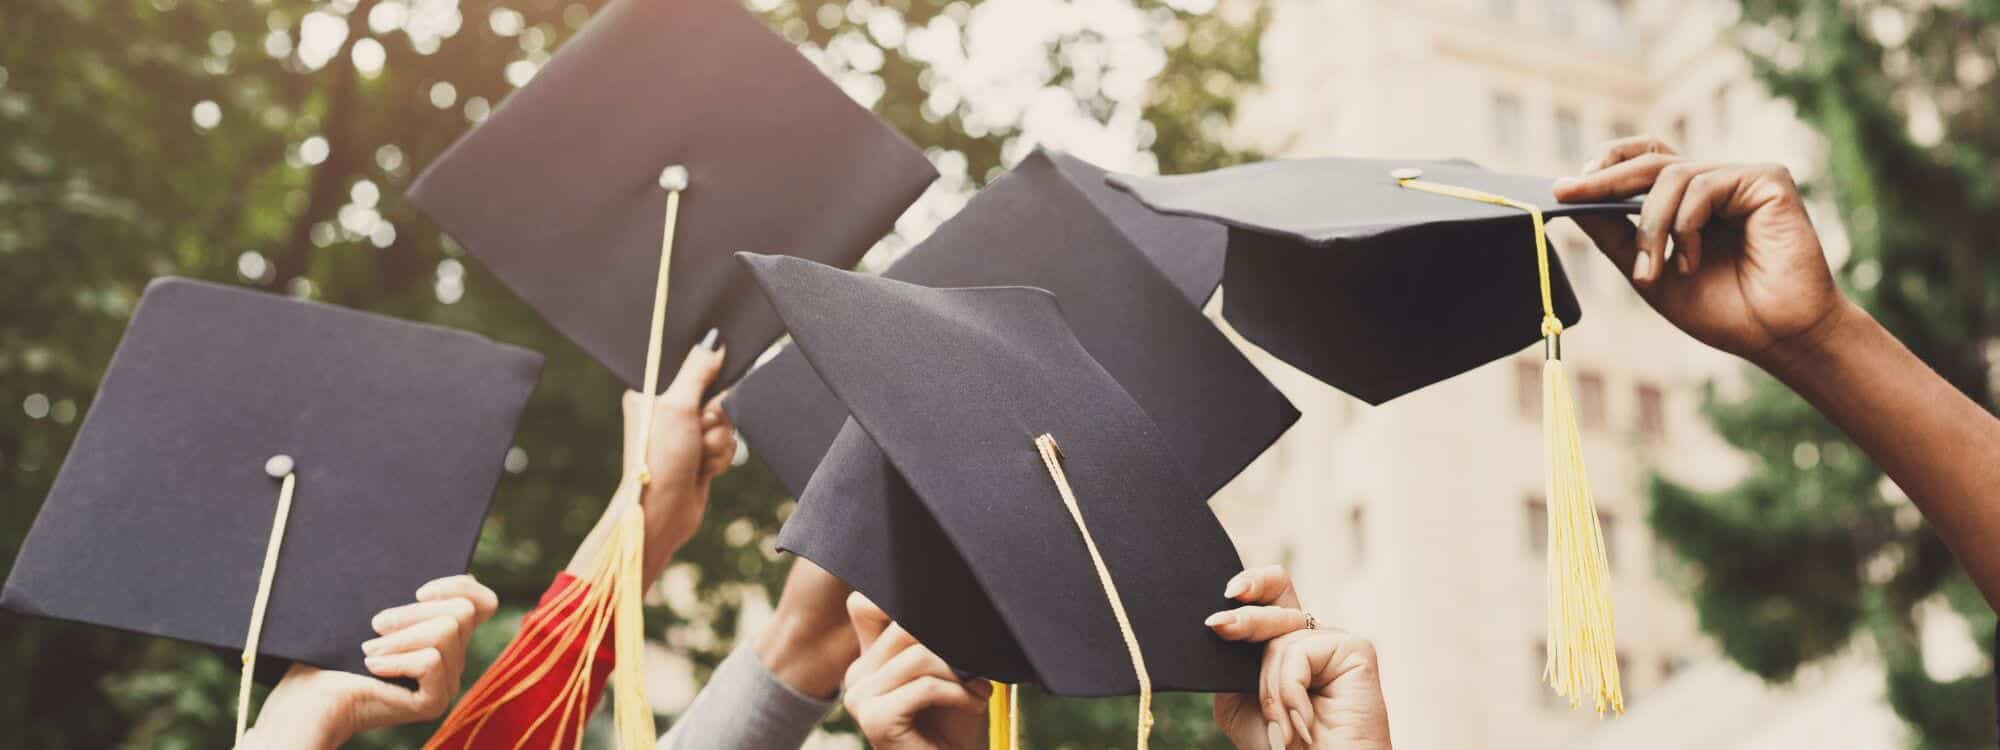 A group throw up their mortarboard hats at Graduation after contacting Southpac Aerospace to find out how they could complete their Diplomas sooner.